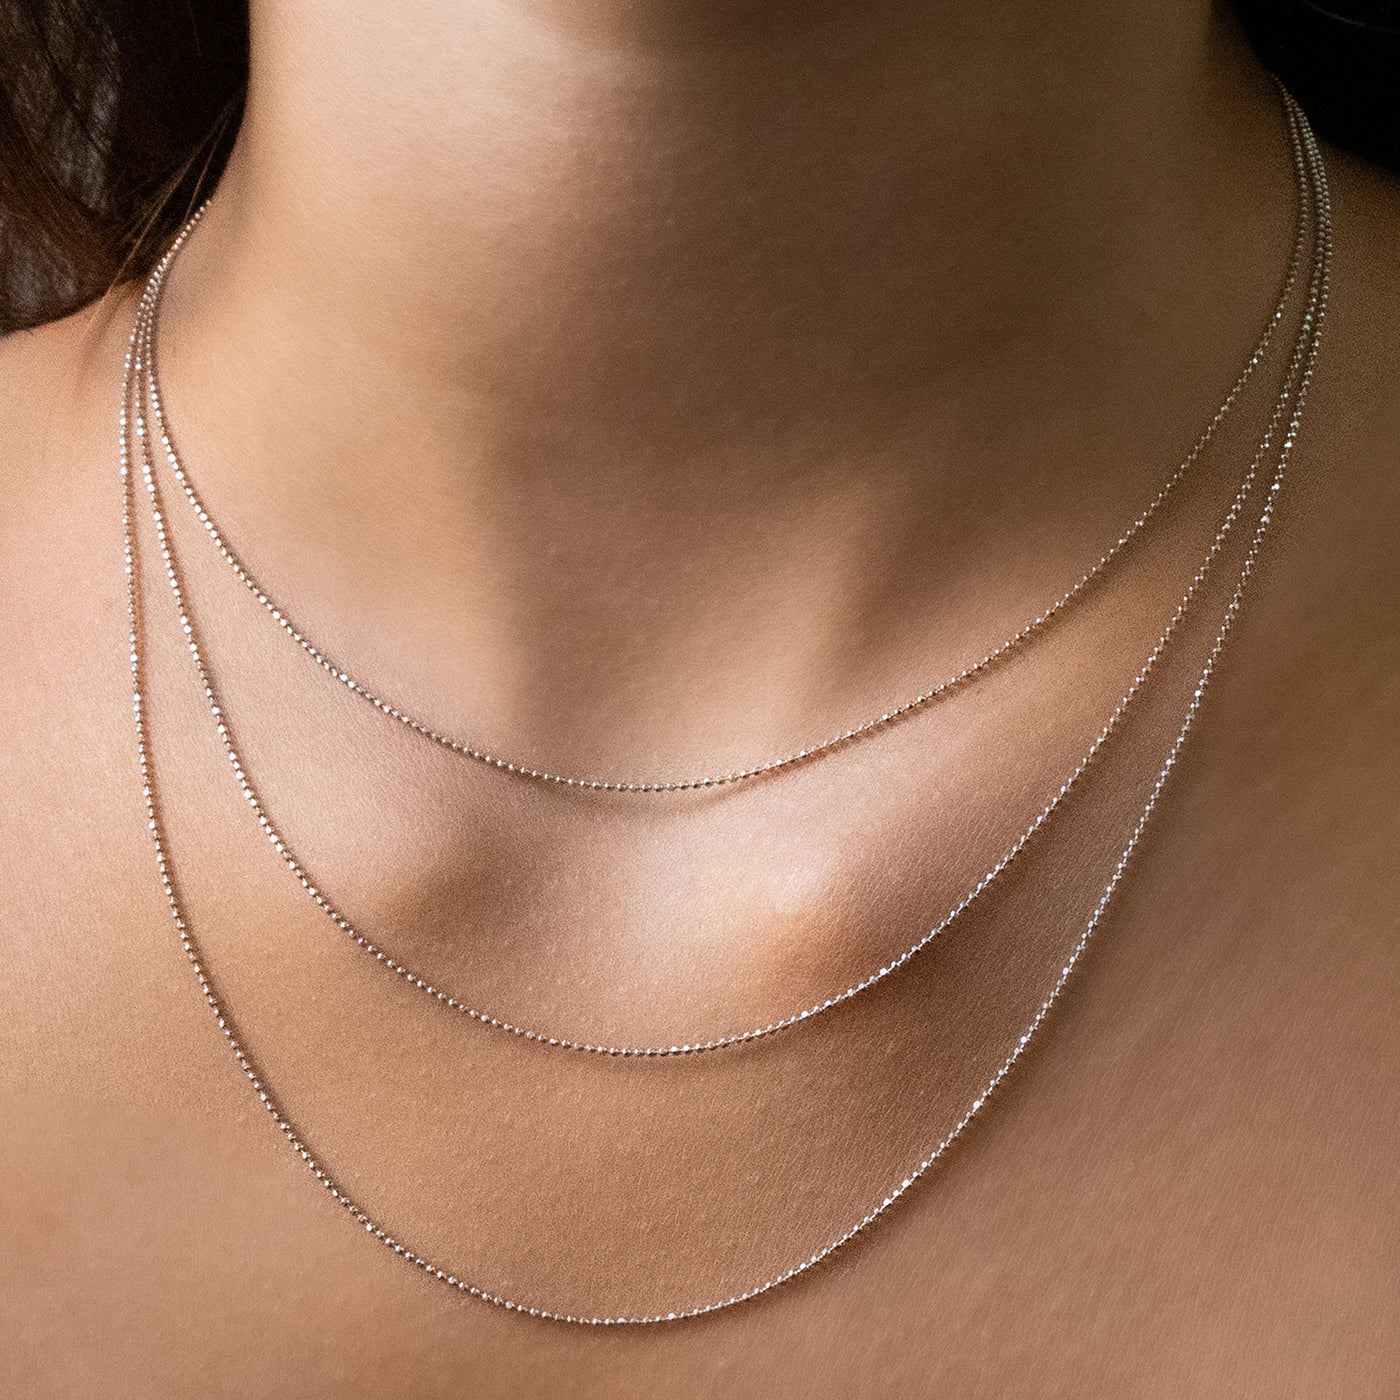 Disco Chain in 14kt Gold - 1.5 mm